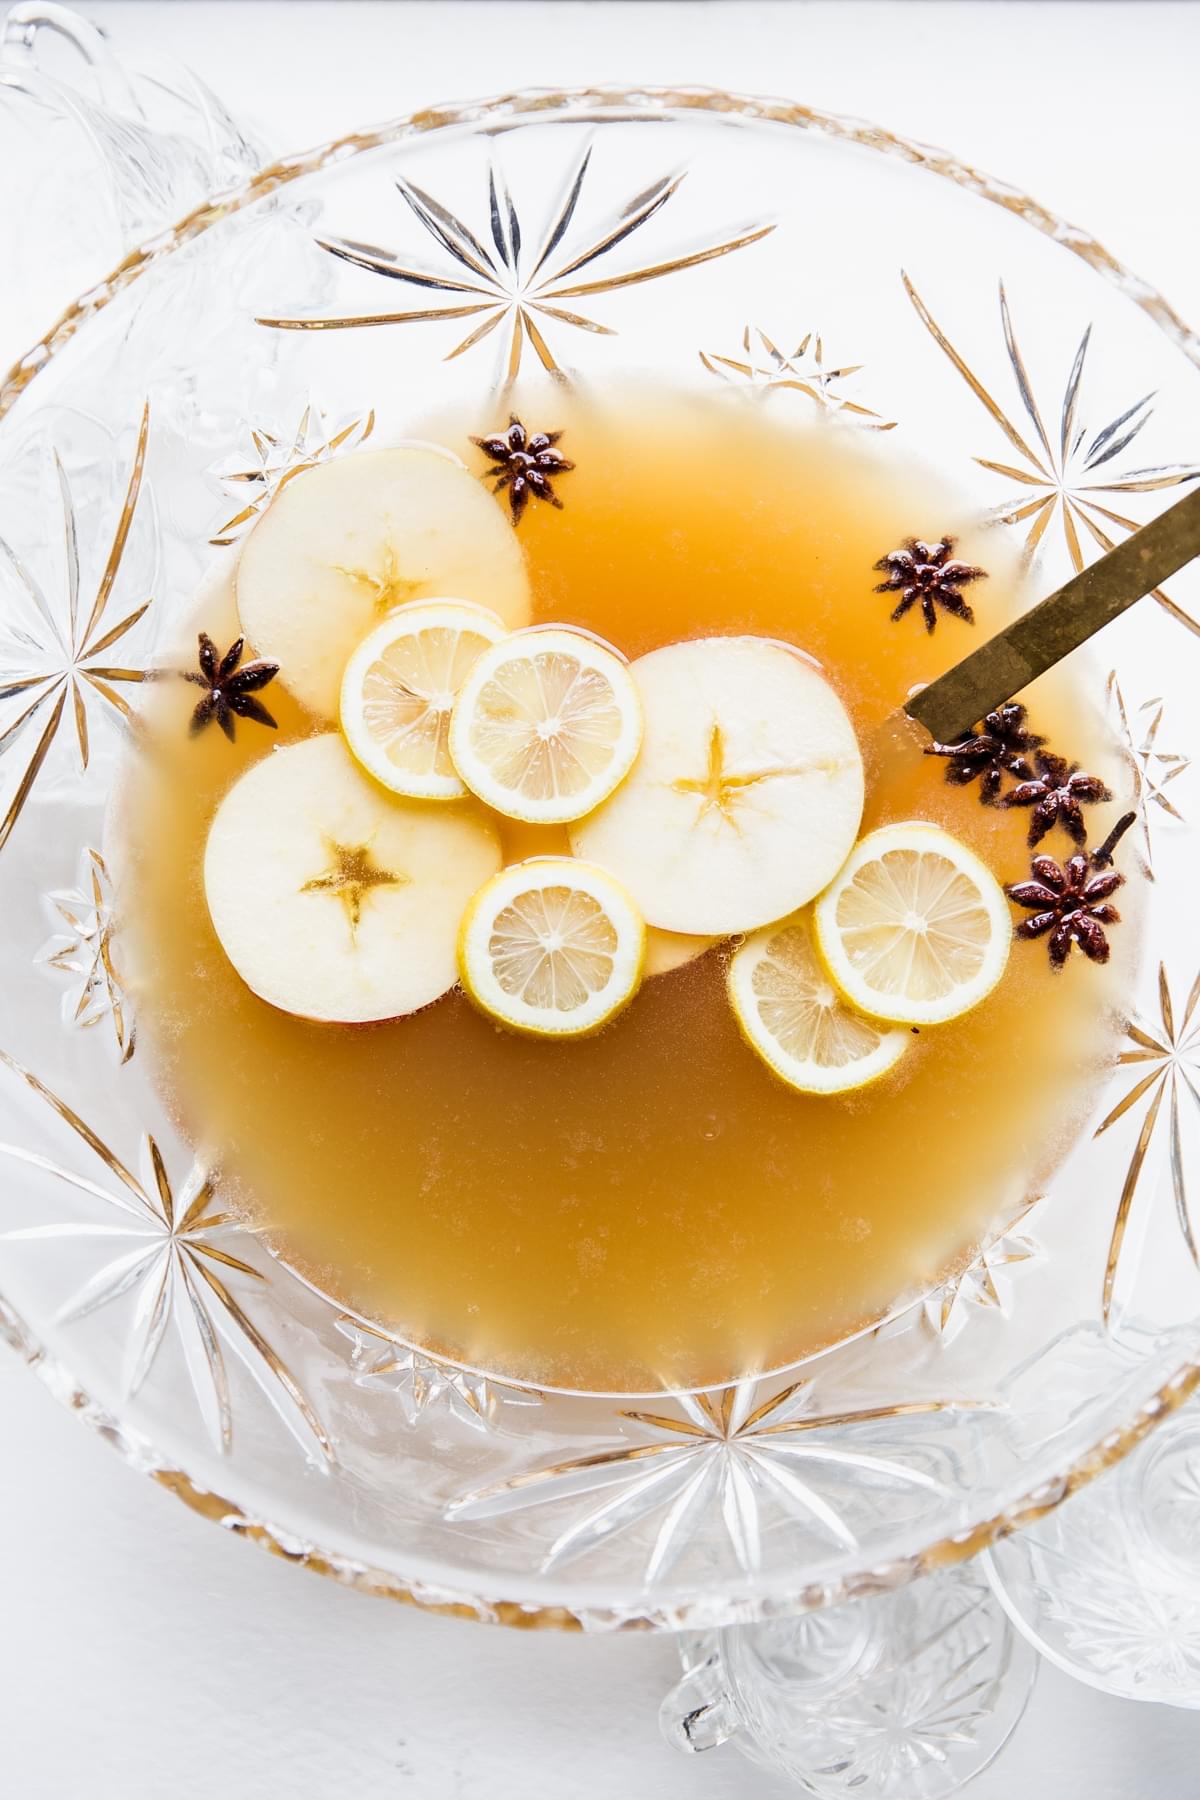 punch bowl topped with apple slices, lemon slices and star anise